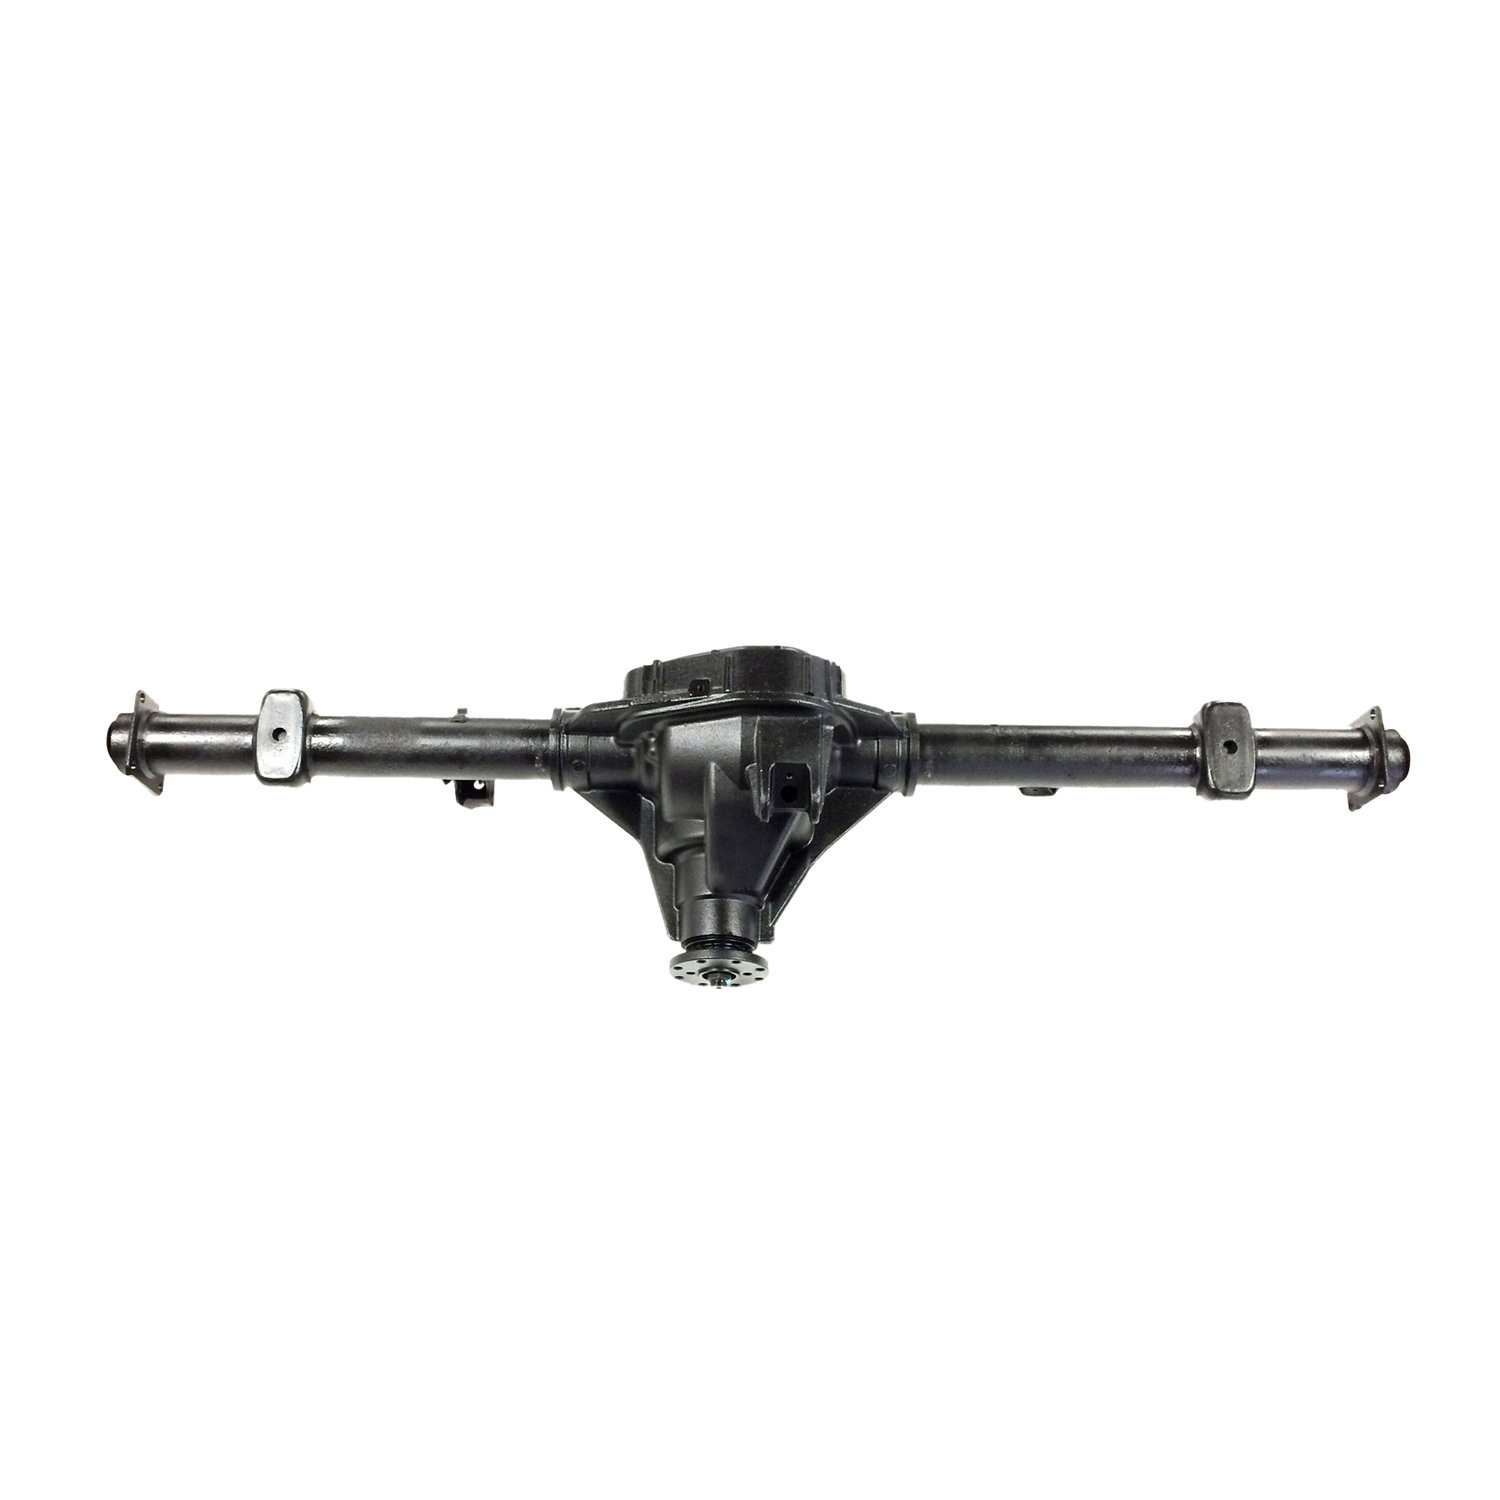 Remanufactured Axle Assy for 9.75" 97-99 F150 3.08 , Rear Drum, Posi LSD *Check Tag*